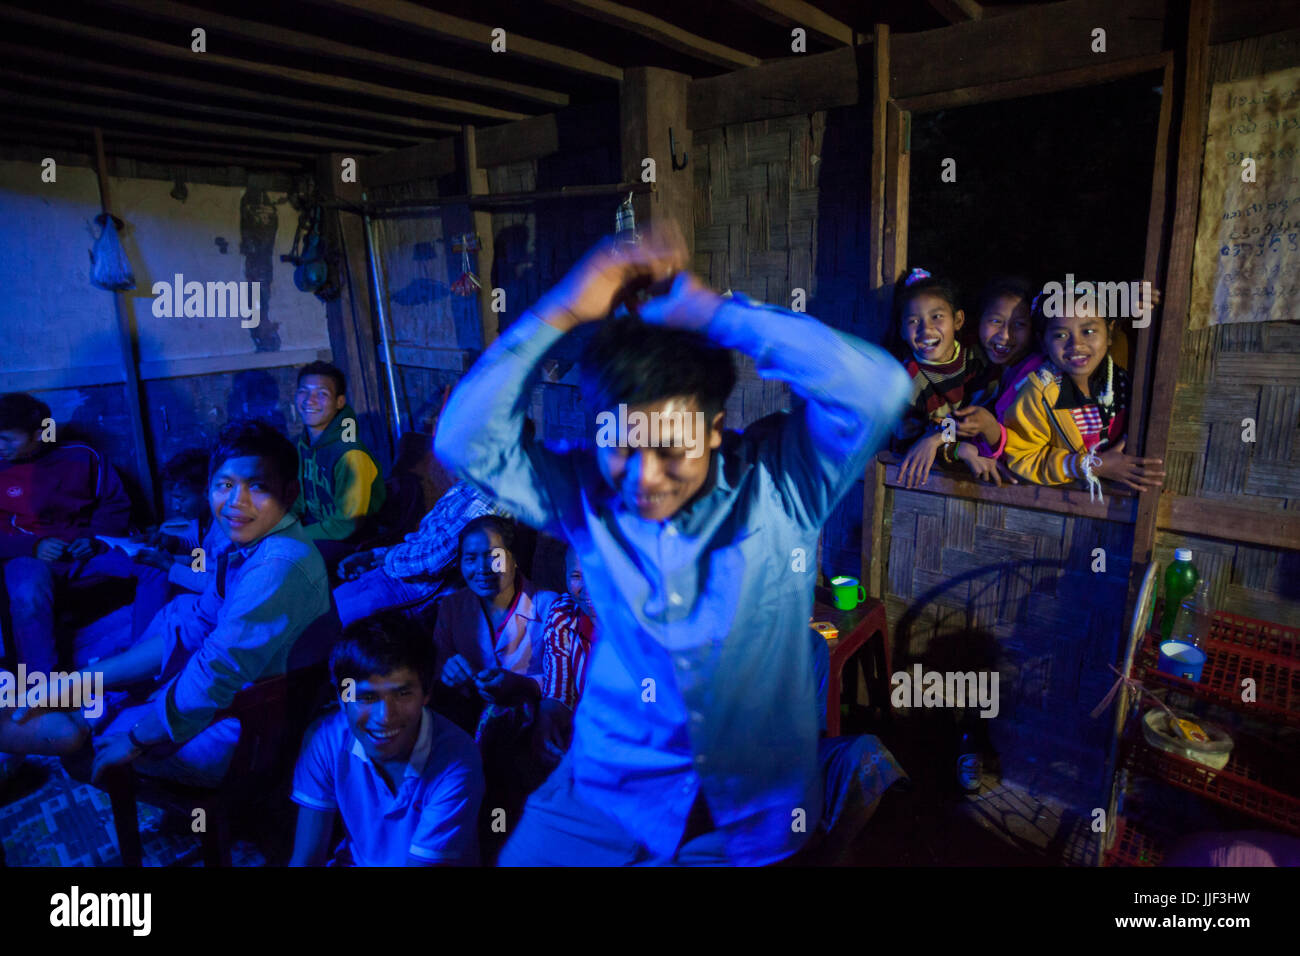 A young man shows off his moves at a party in Ban Huay Phouk, Laos as other partygoers, and young girls in the window, watch. The celebration was hoped to bring good luck to the woman of the house, who was suffering from cancer and whom modern western medicine had failed to treat. Stock Photo